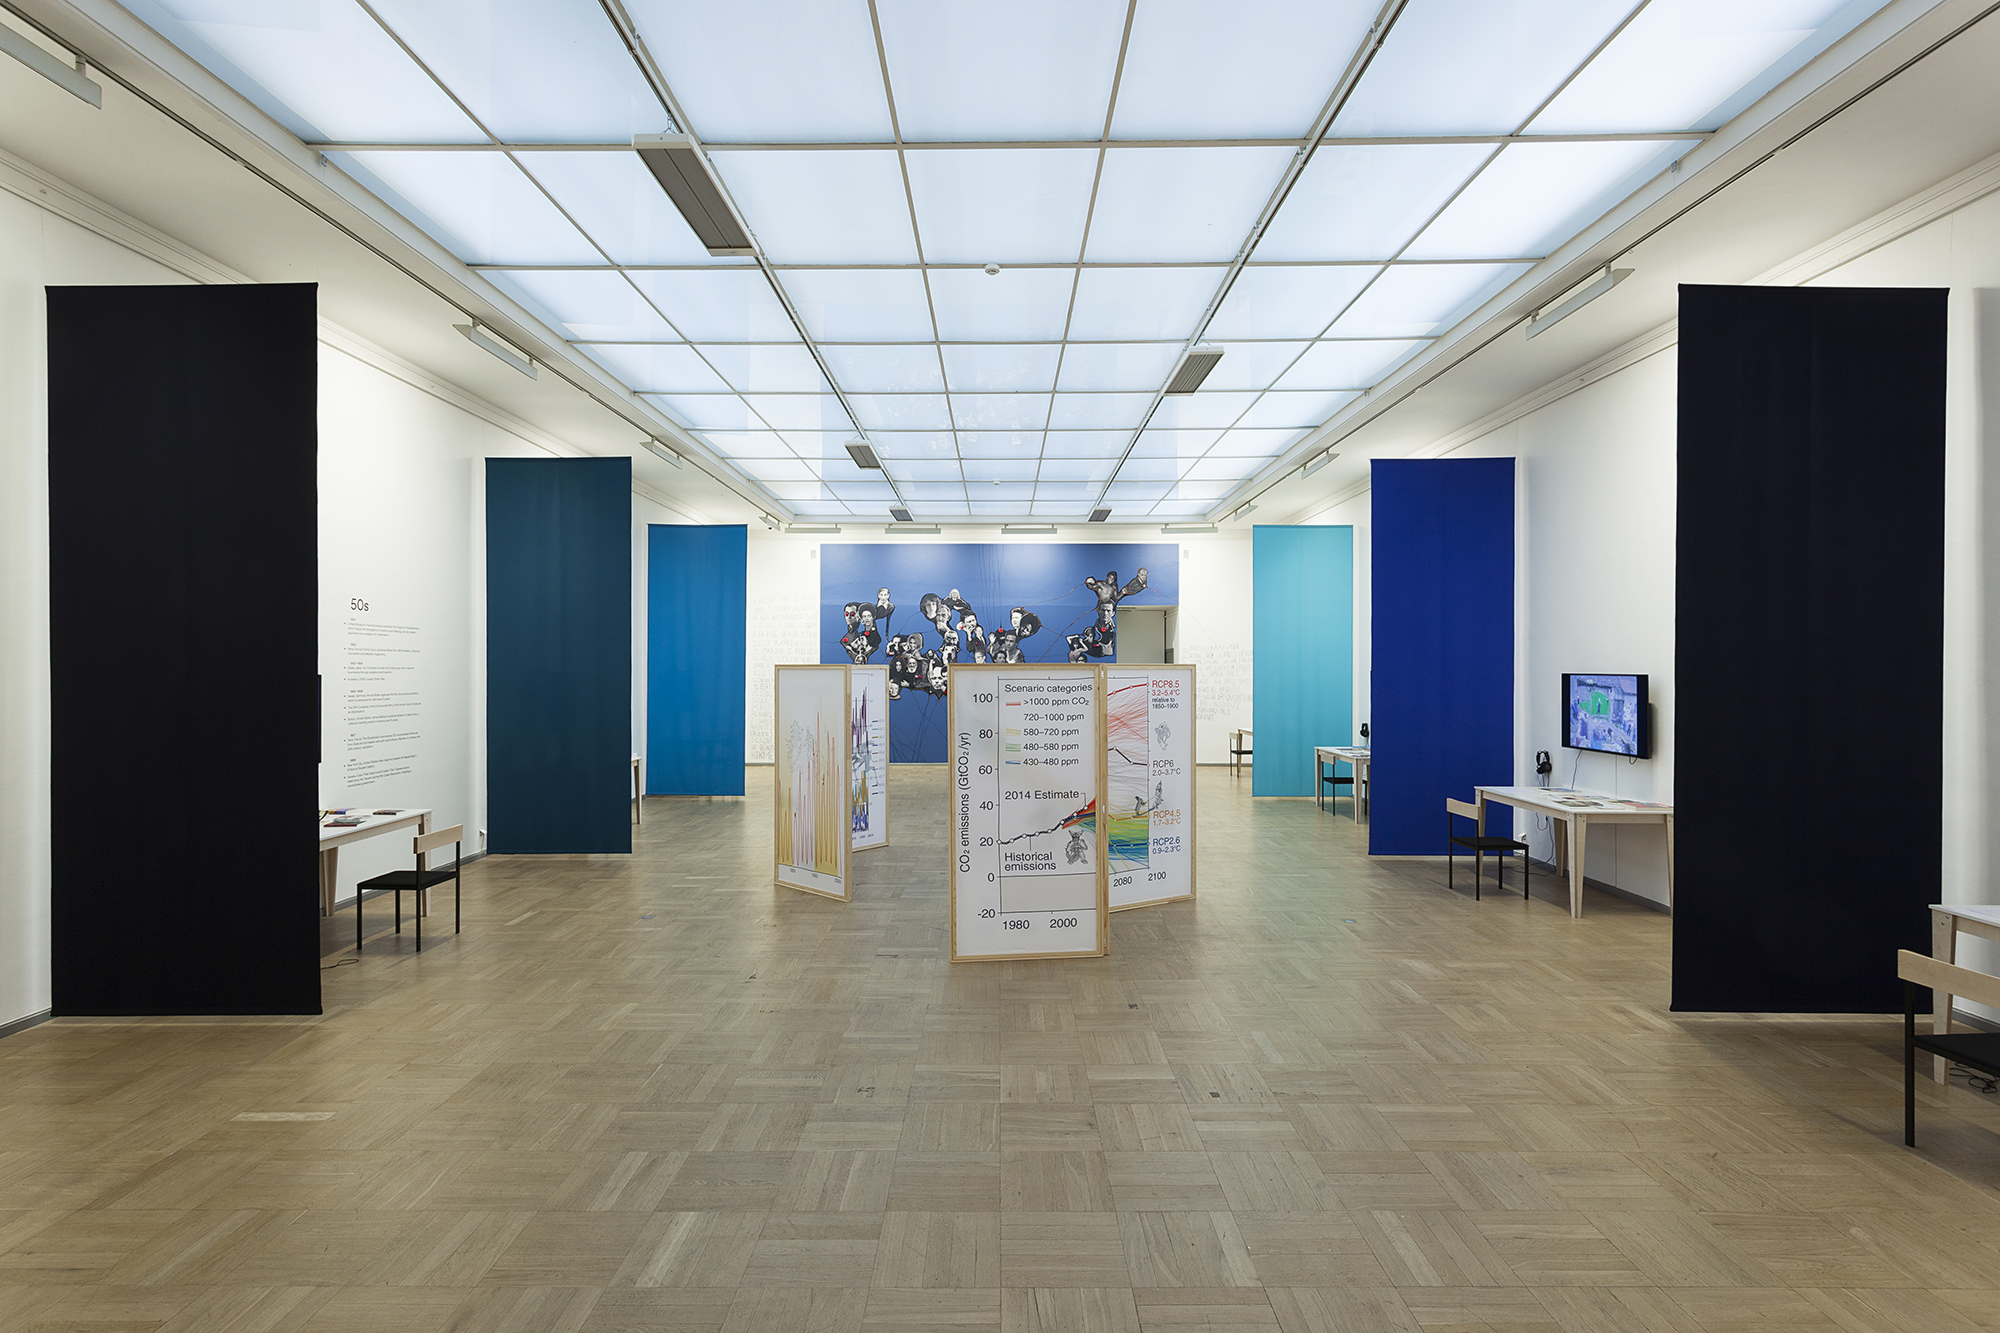 A bright room with blue dividers and a blue wall in the back with screens of graphs are arranged in the center.